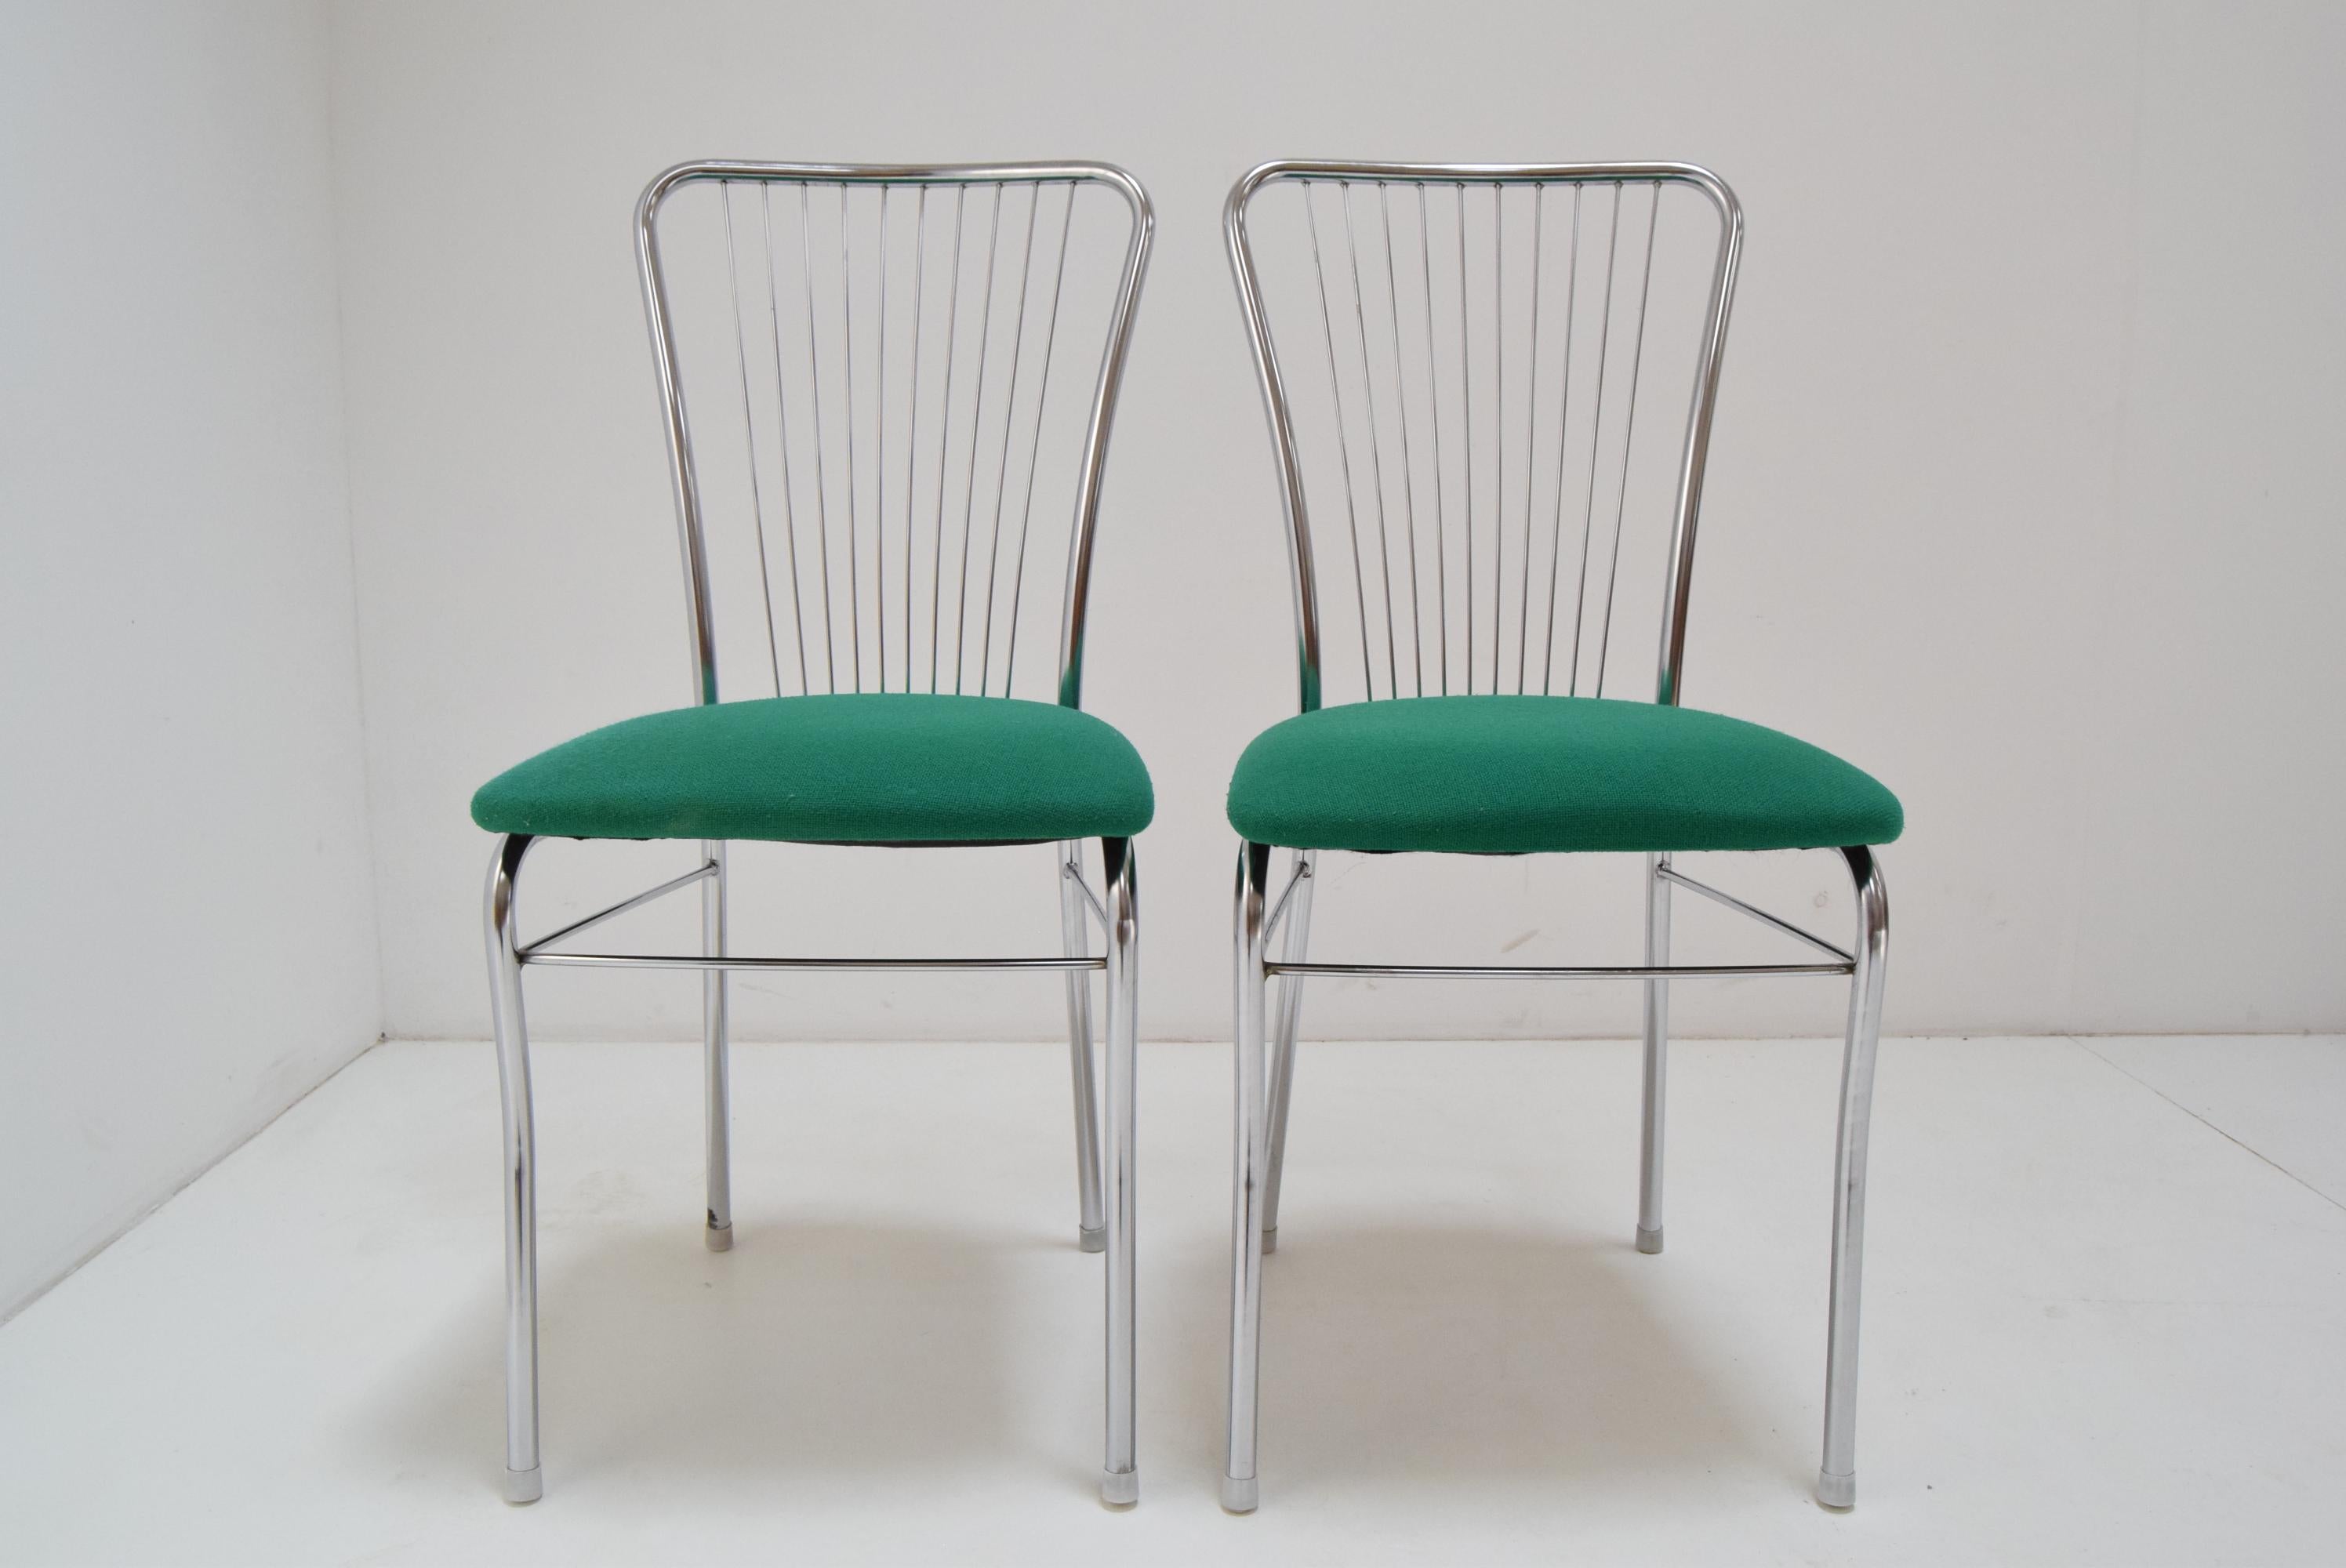 Pair of Mid-Century Chrome Chairs, Nowy Styl, circa 1980's For Sale 3